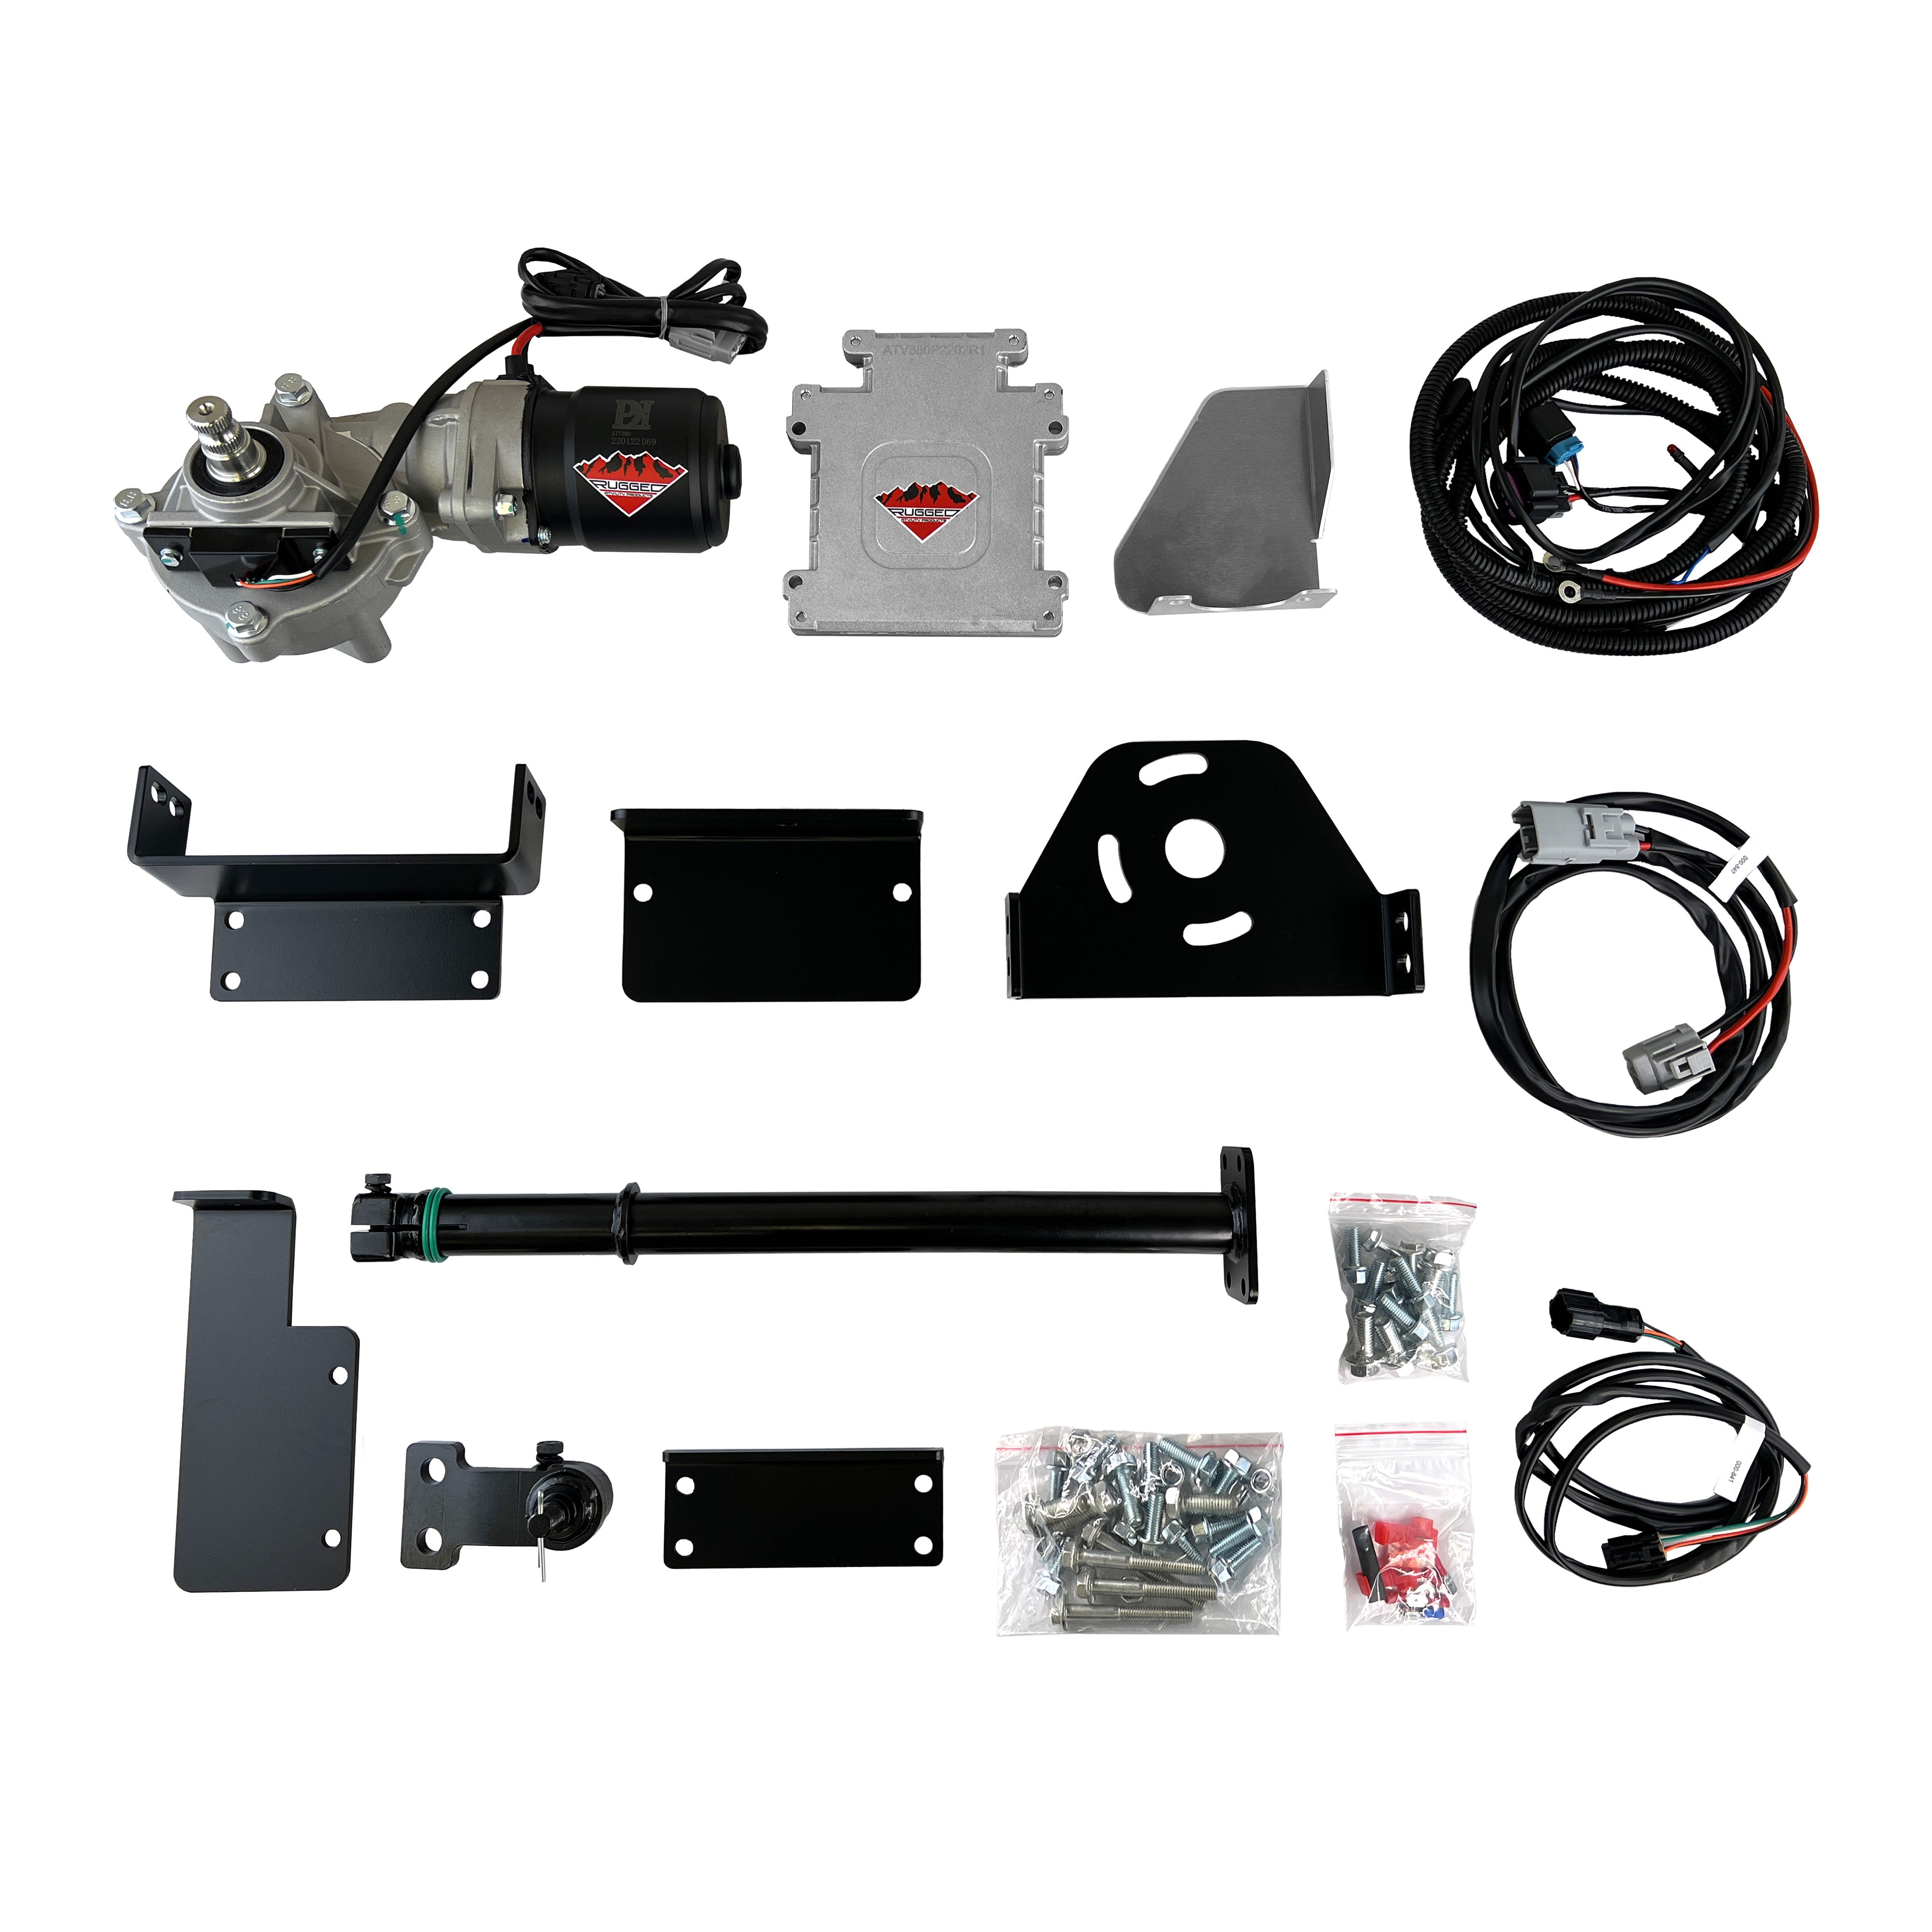 Electric Power Steering Kit for Can Am Renegade 500 